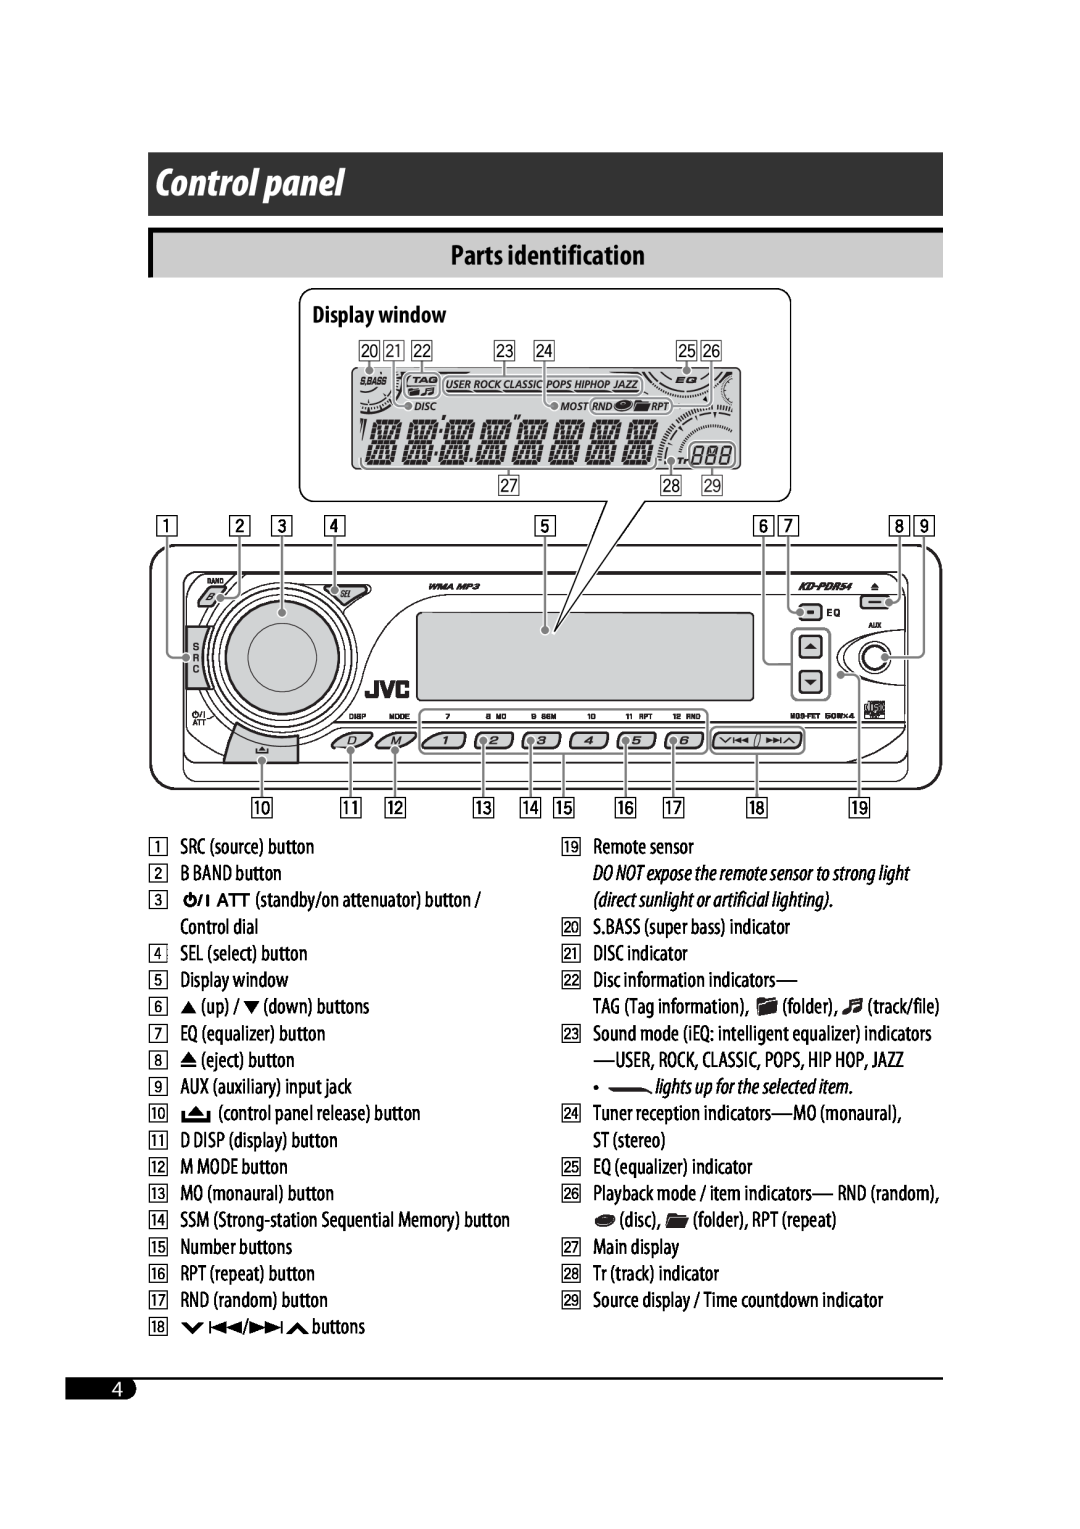 JVC GET0425-001A manual Control panel, Parts identification, Display window, lights up for the selected item 